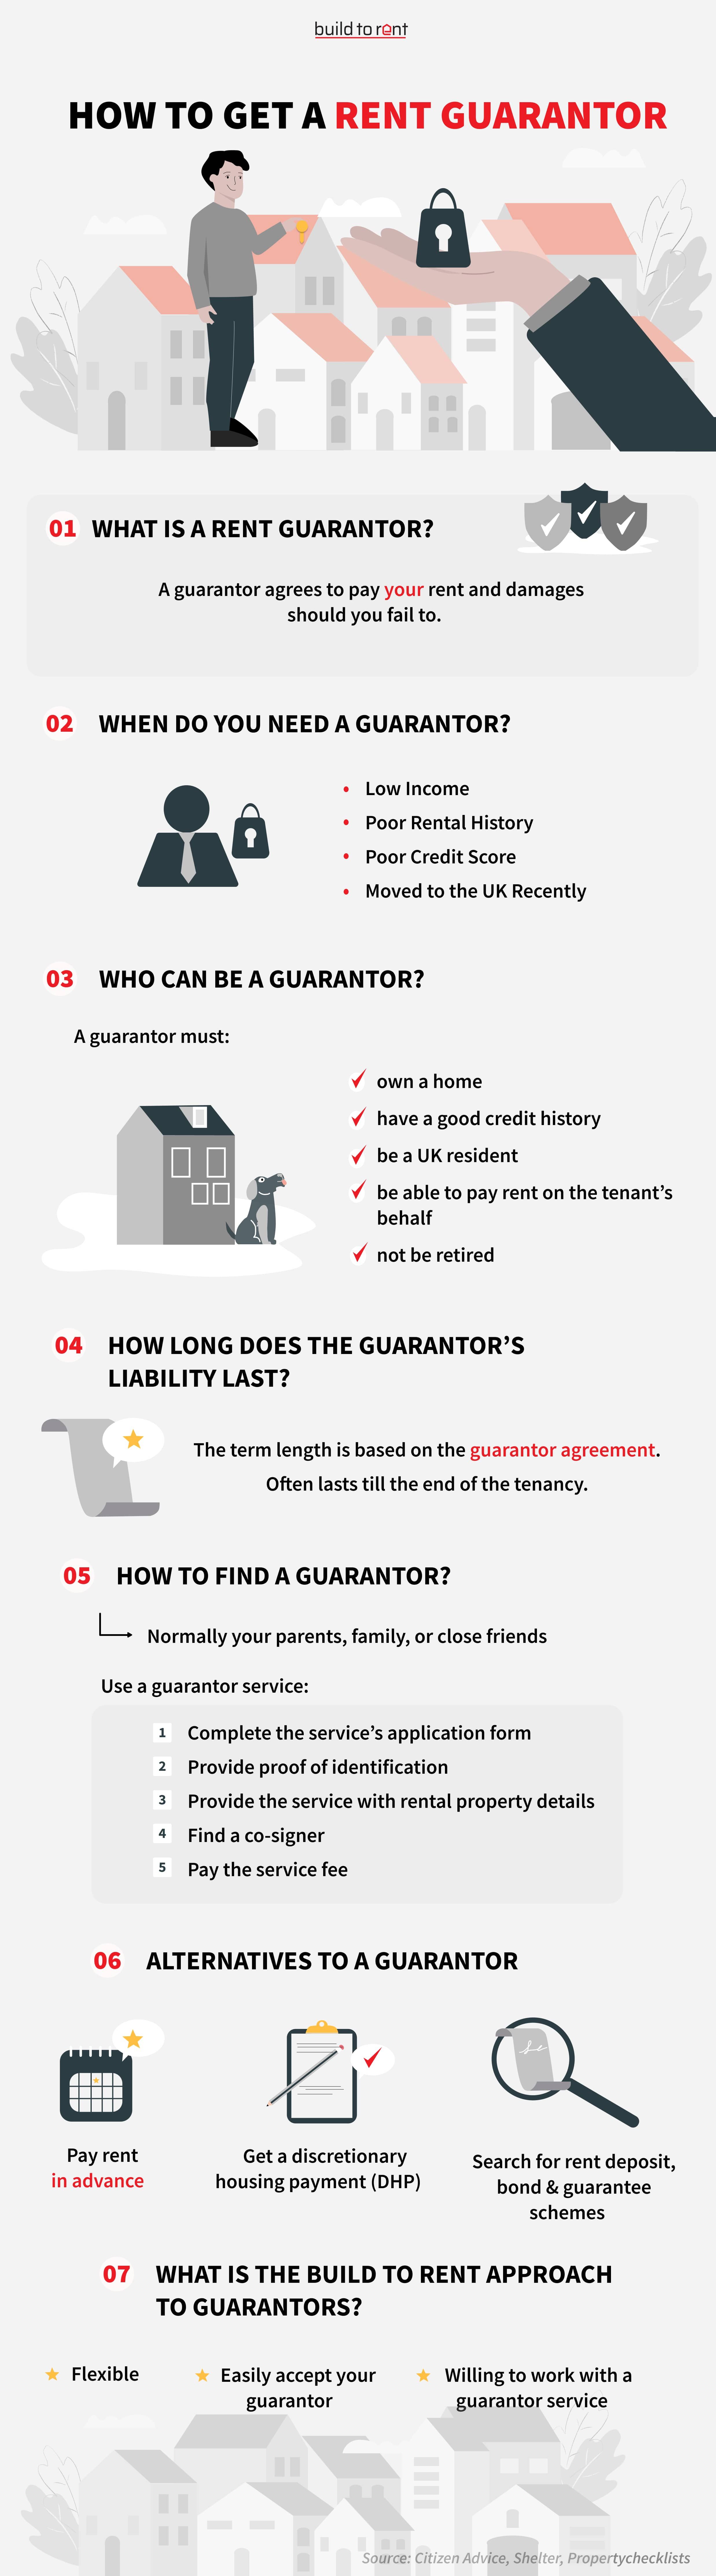 How to Get a Rent Guarantor for Renting